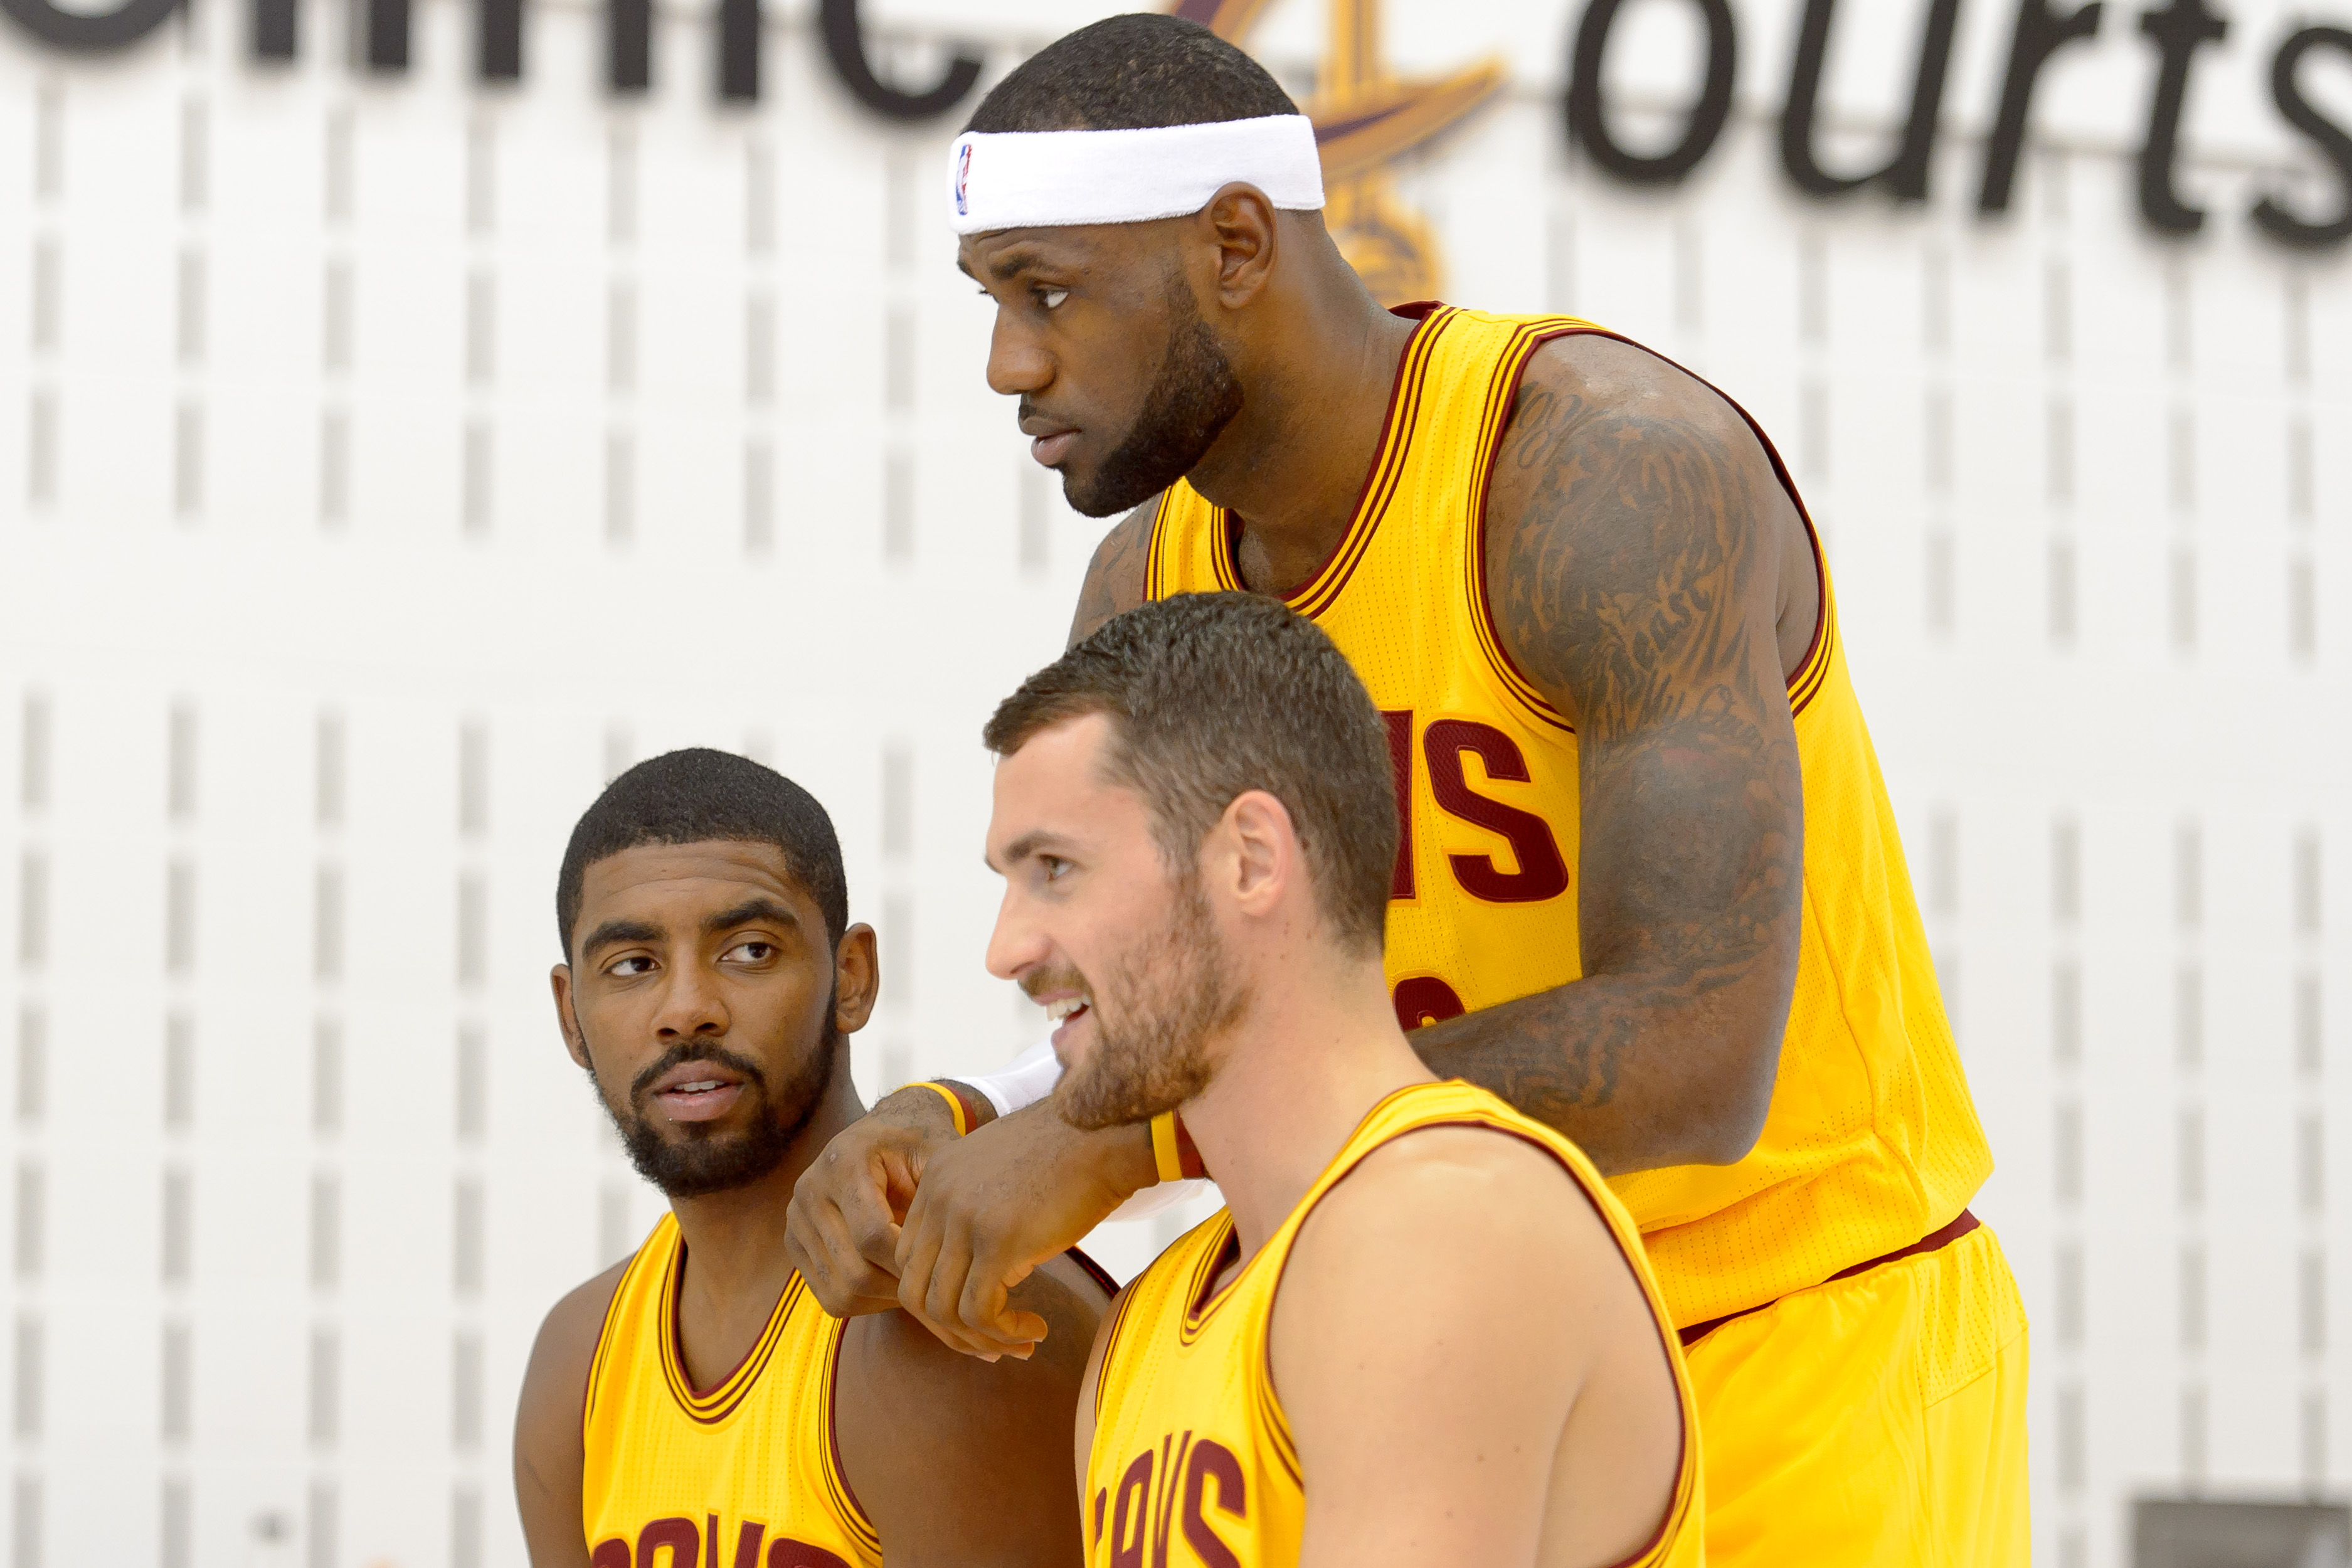 INDEPENDENCE, OH - SEPTEMBER 25: Kevin Love #0 Kyrie Irving #2 and LeBron James #23 of the Cleveland Cavaliers pose for a photo during media day at Cleveland Clinic Courts on September 25, 2014 in Independence, Ohio. (Photo by Jason Miller/Getty Images)